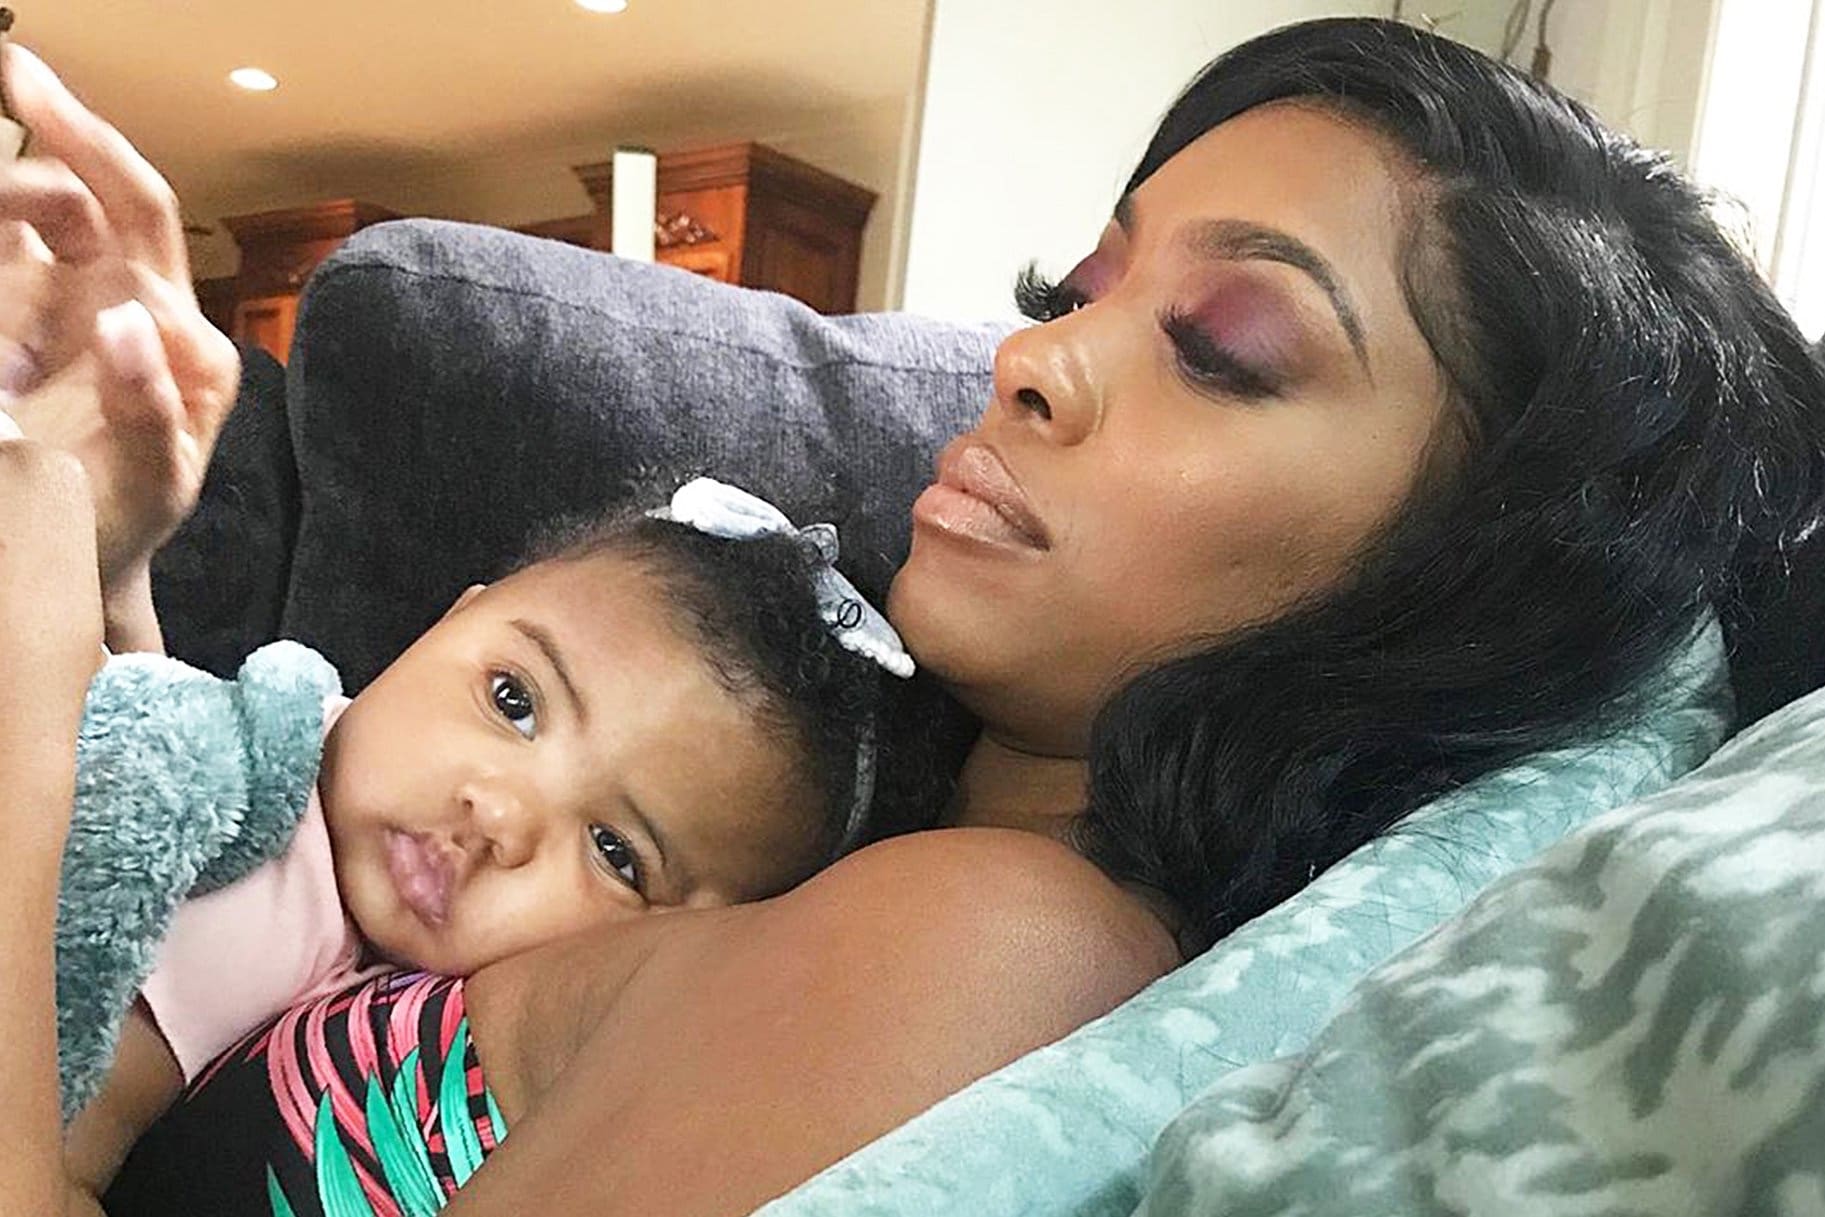 Porsha Williams Publicly Proclaims Her Love For Her Daughter Pilar Jhena For Her 8th-Month Anniversary- Read The Emotional Message